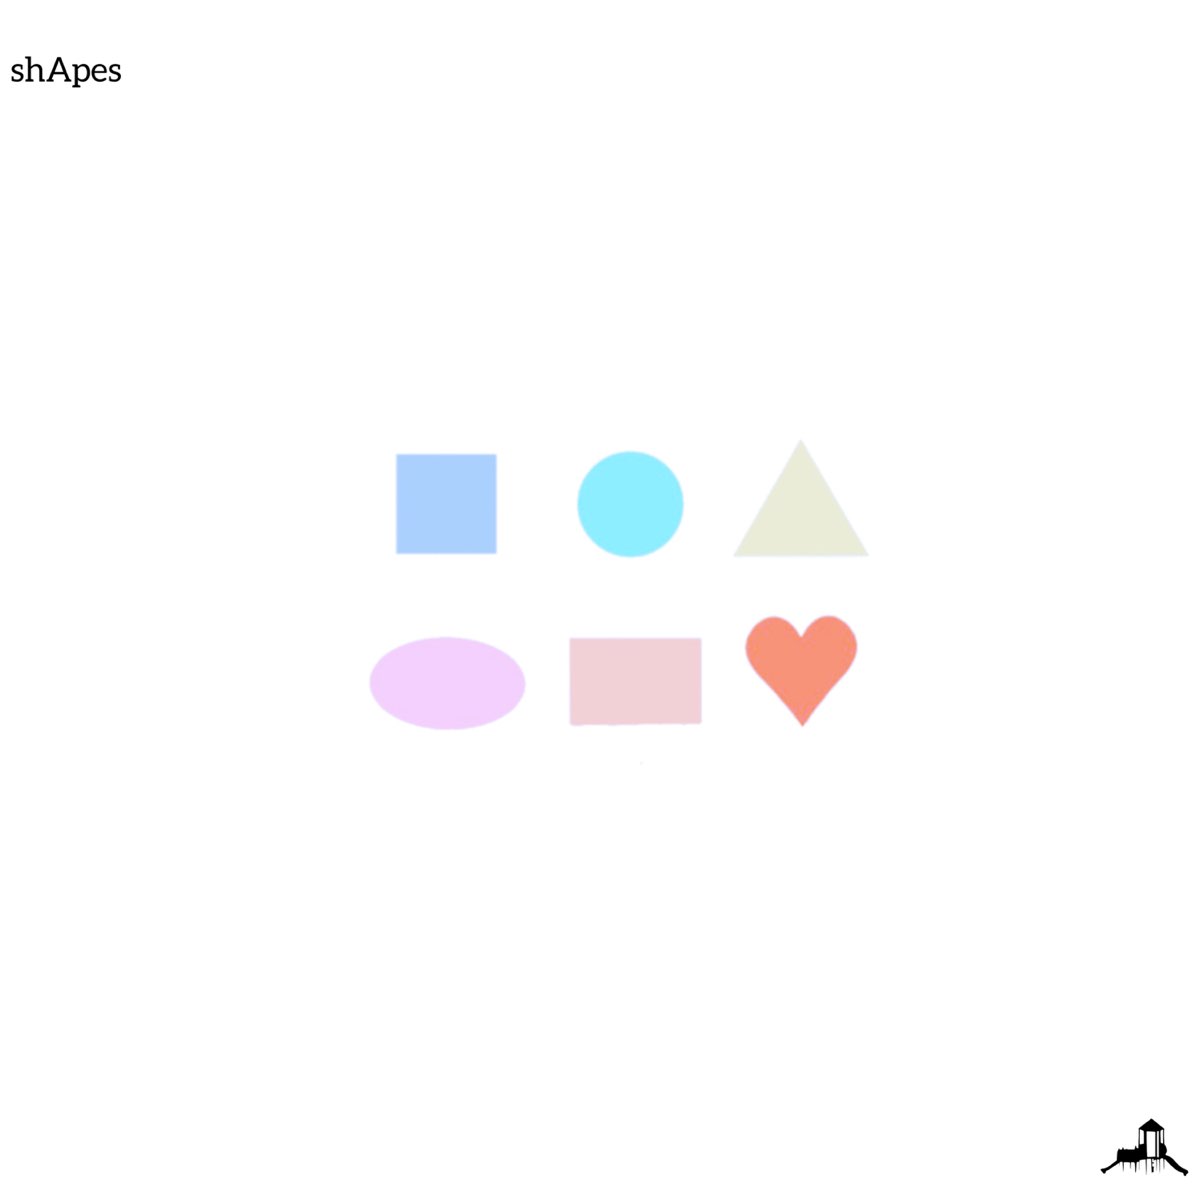 shApes by siid on Apple Music